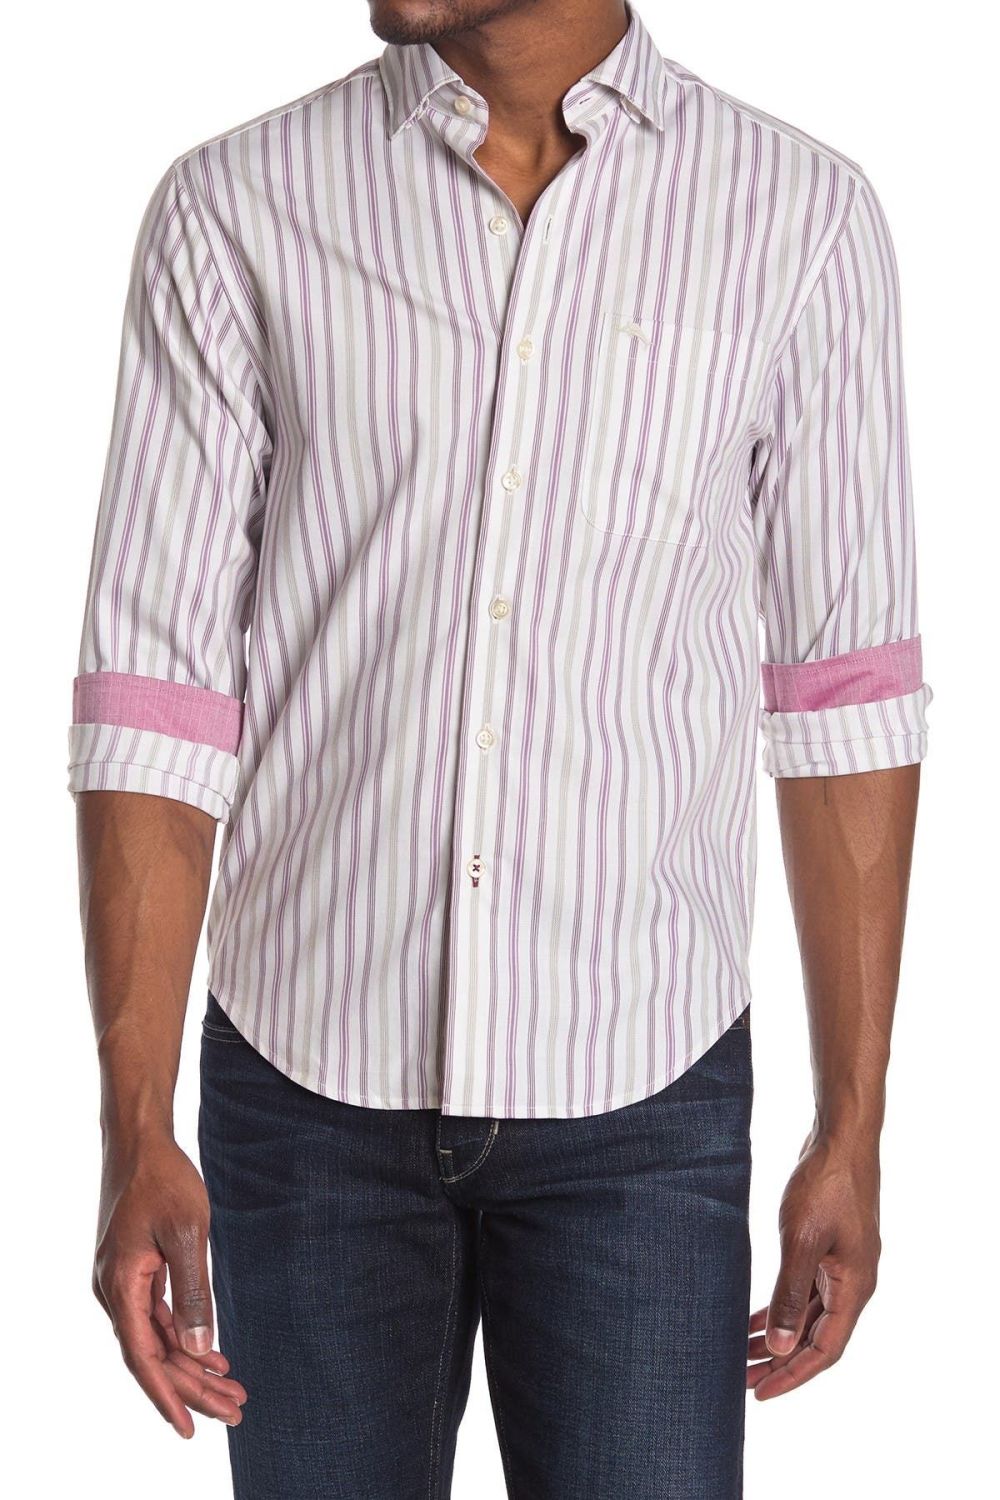 Tommy Bahama Vertical Striped Shirt Size: XS